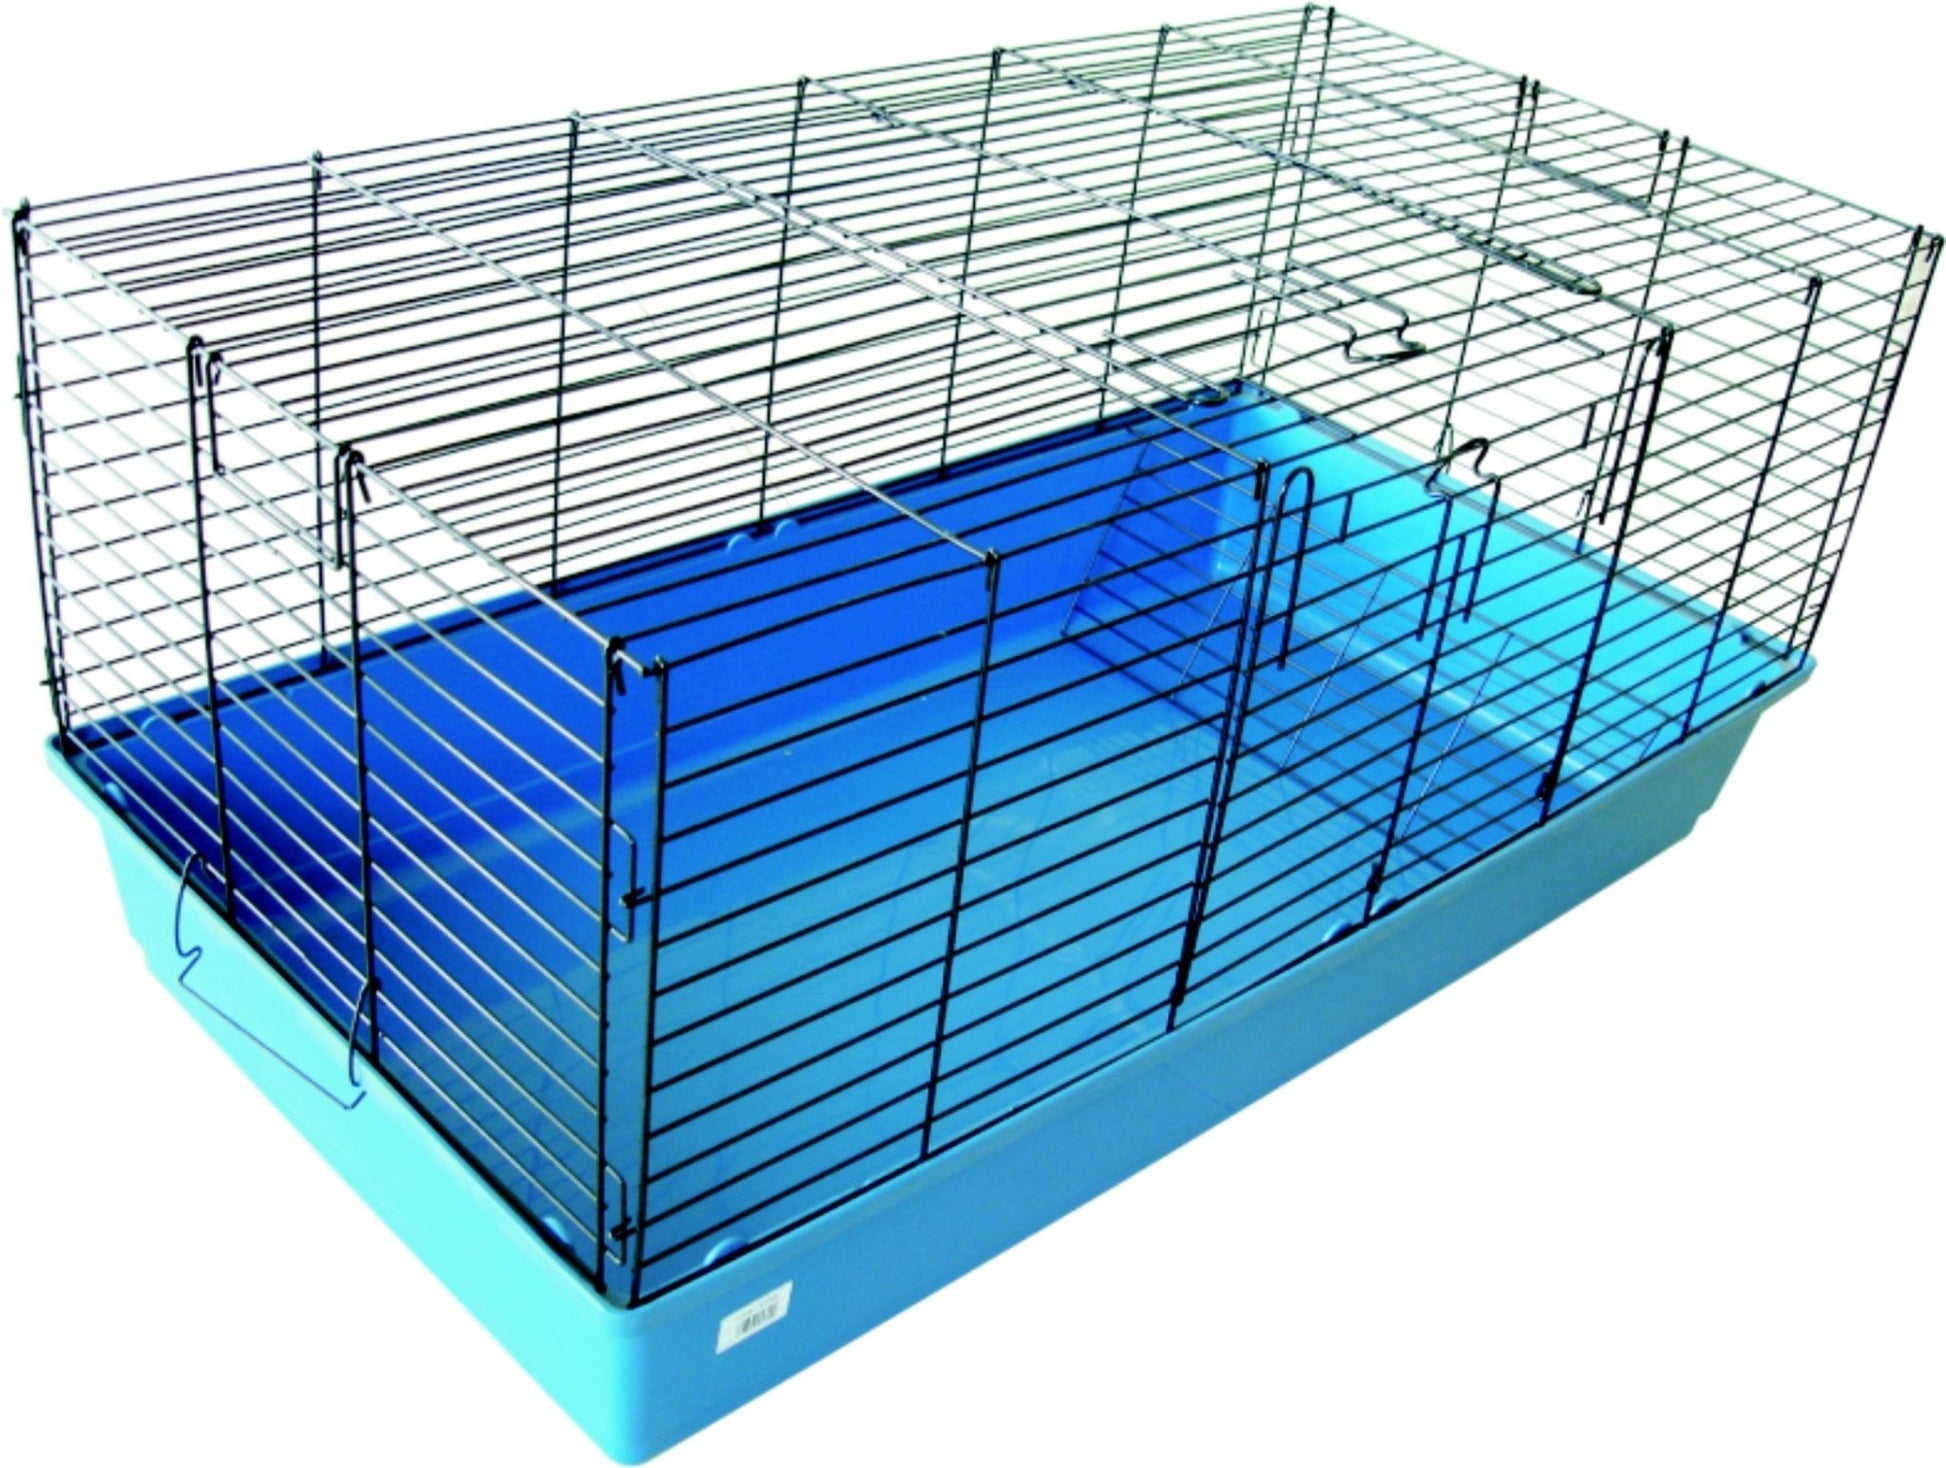 Bono Fido Large Mouse Cage with Tunnels